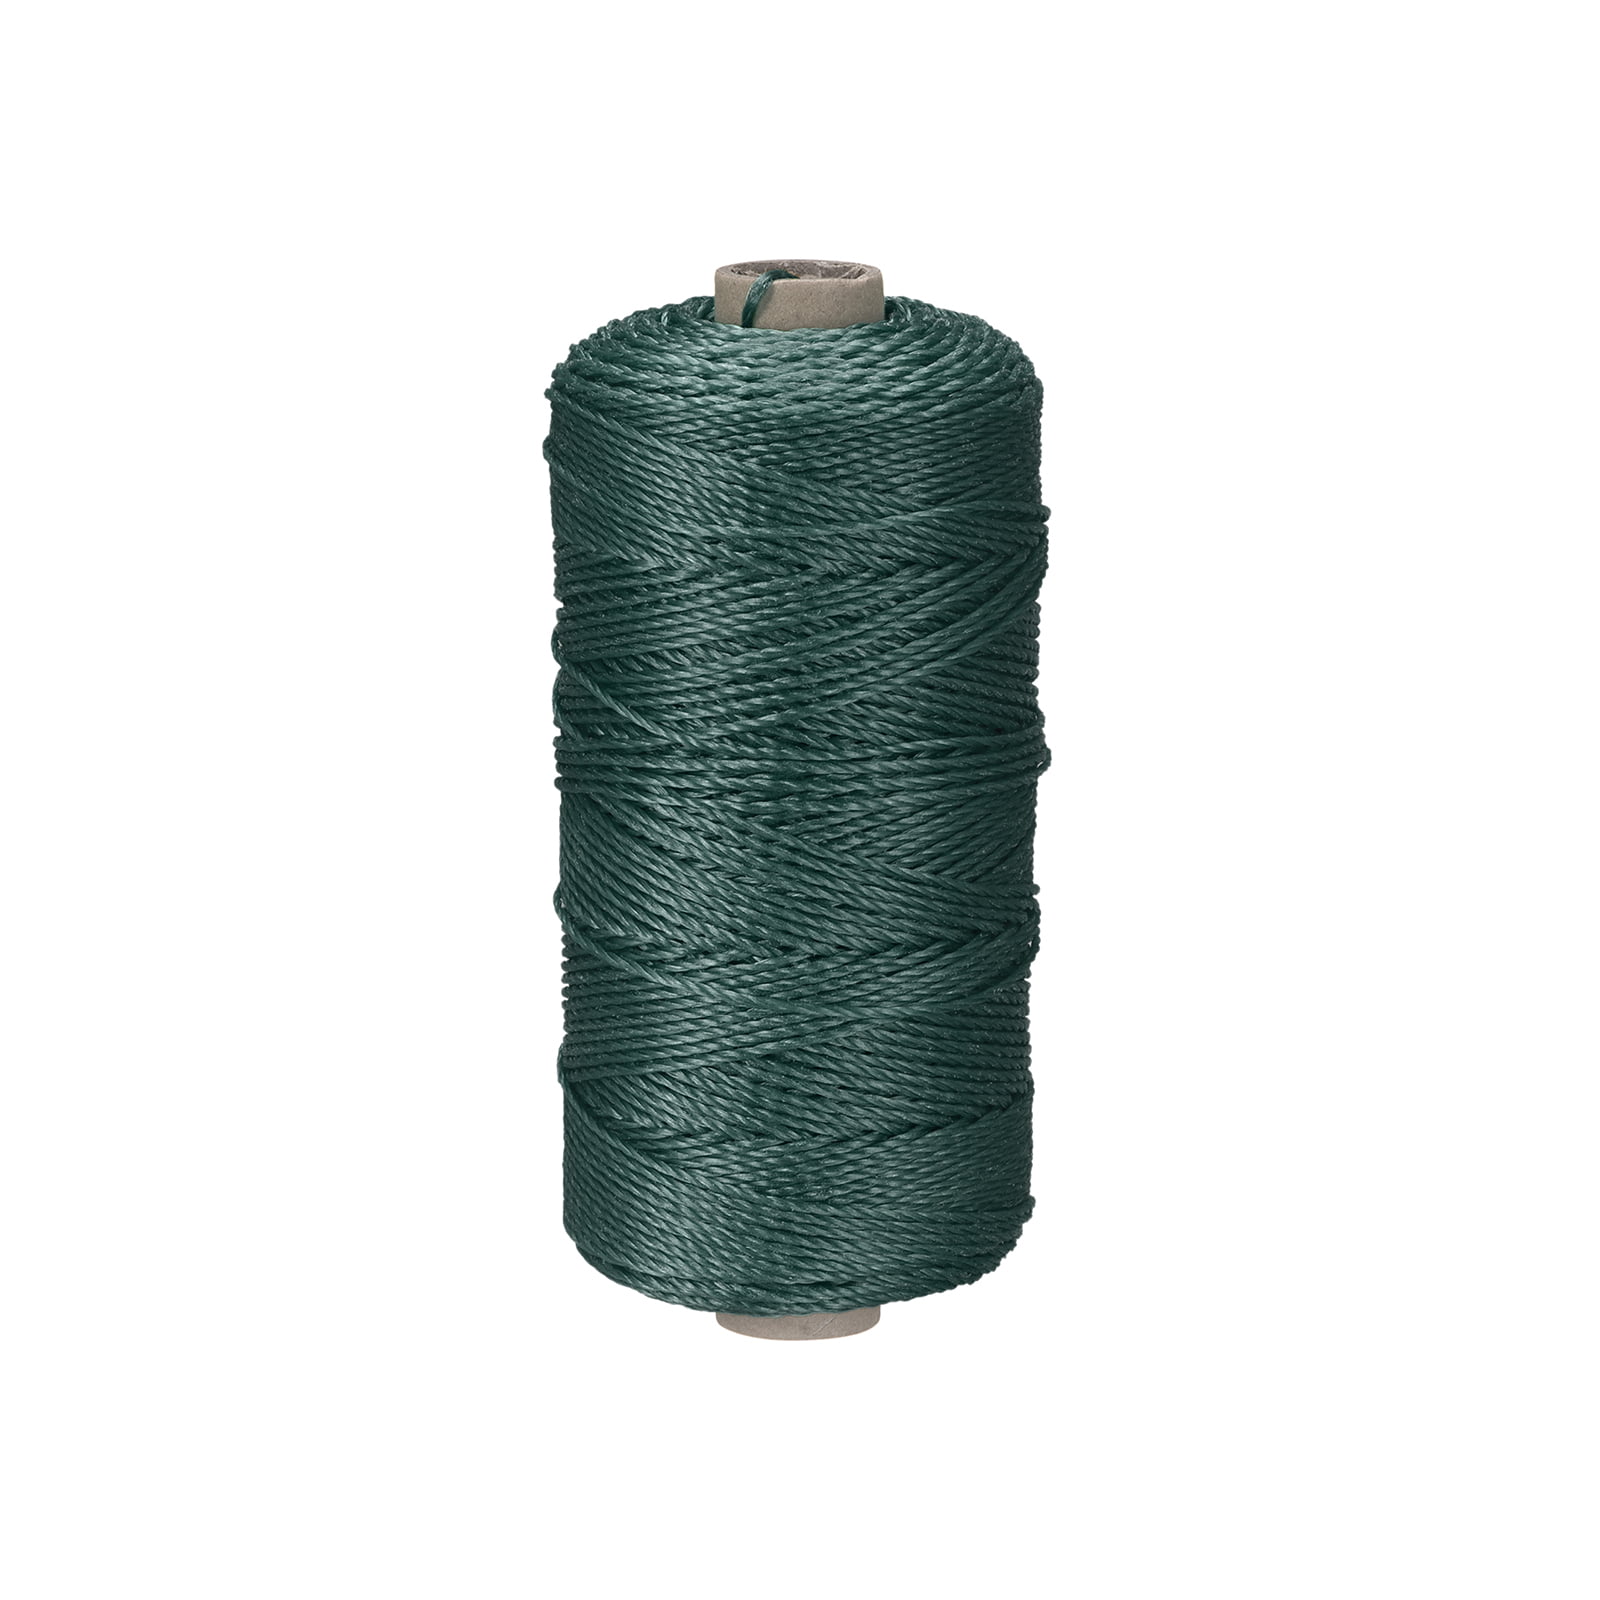 Twisted Nylon Line Twine String Cord for Gardening Marking DIY Projects  Crafting Masonry (Green, 1.5mm-328 feet)